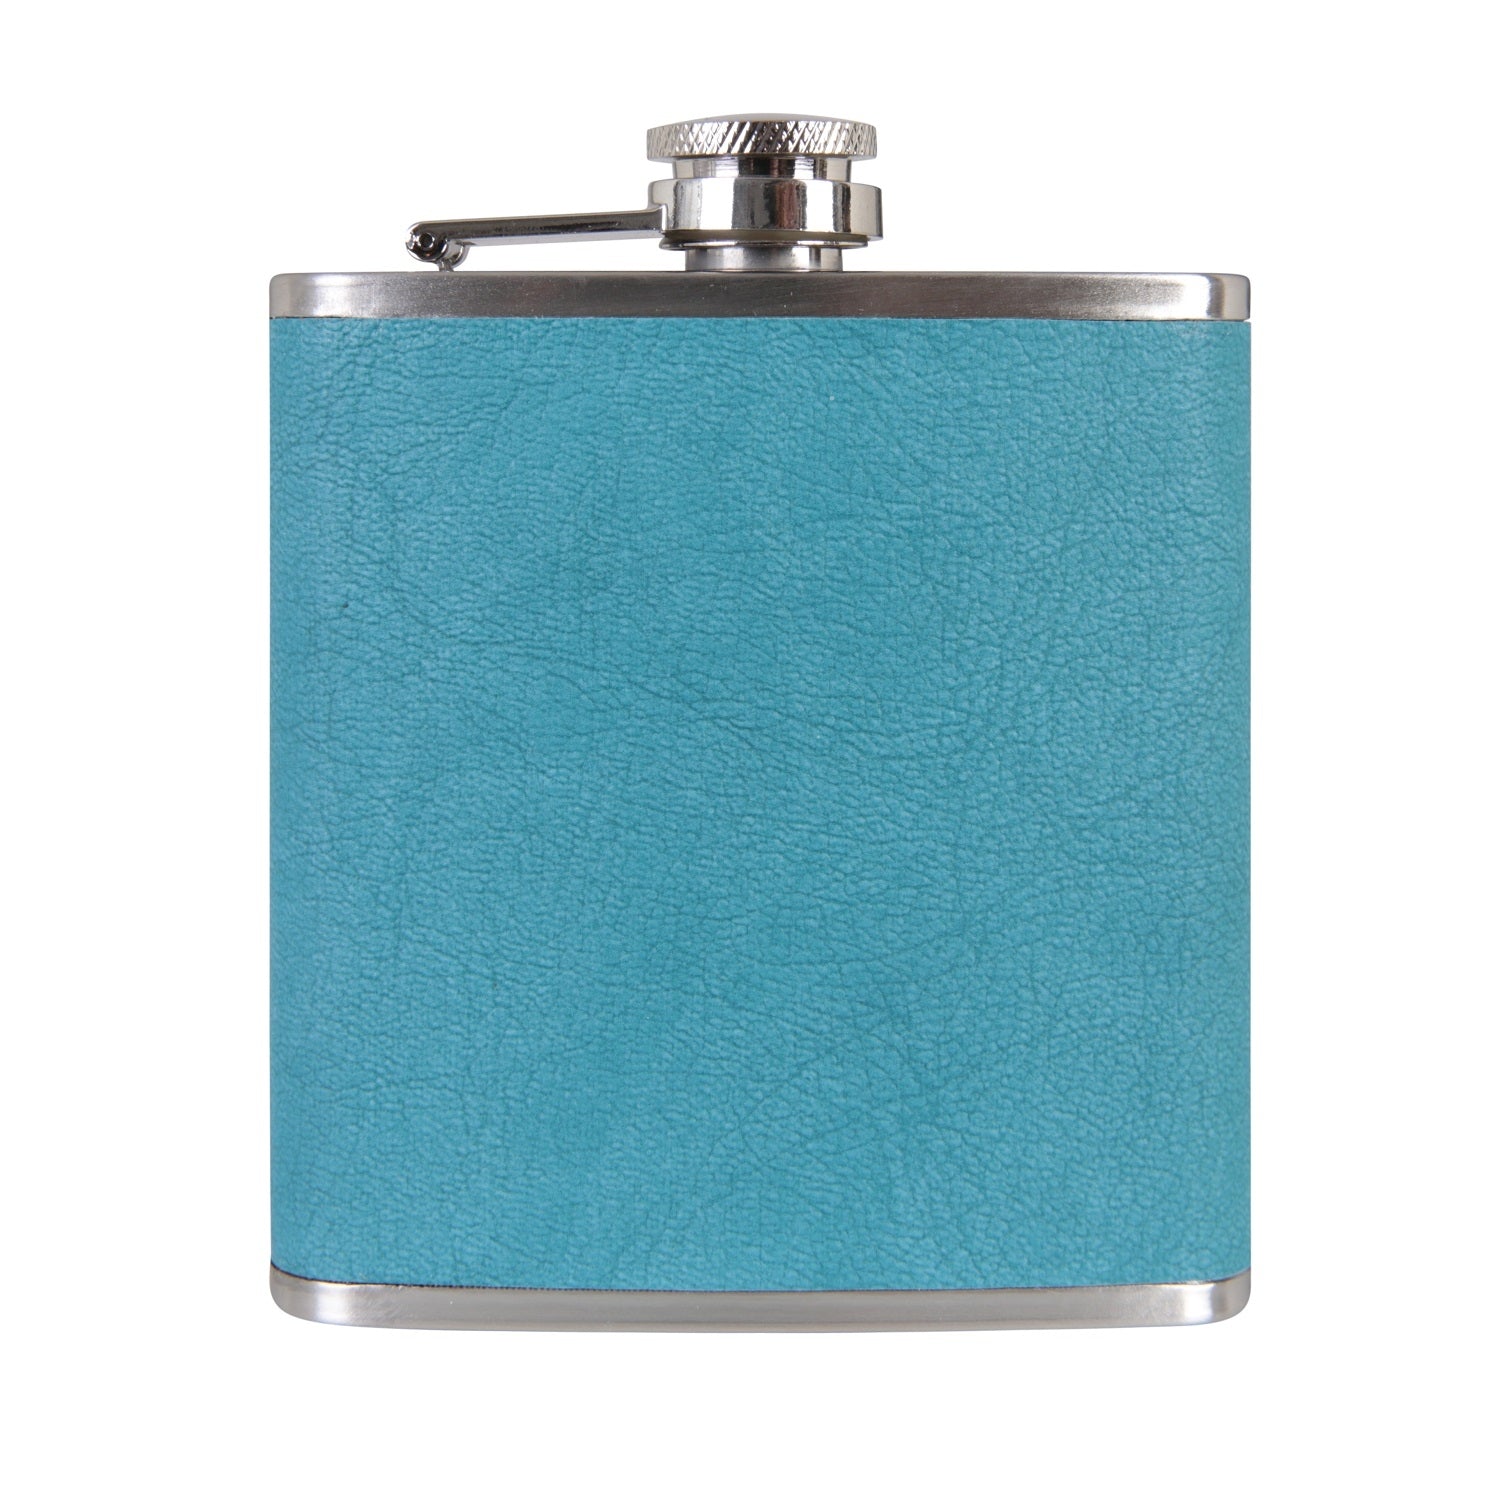 What are Hip Flasks Used For? – Noble Macmillan